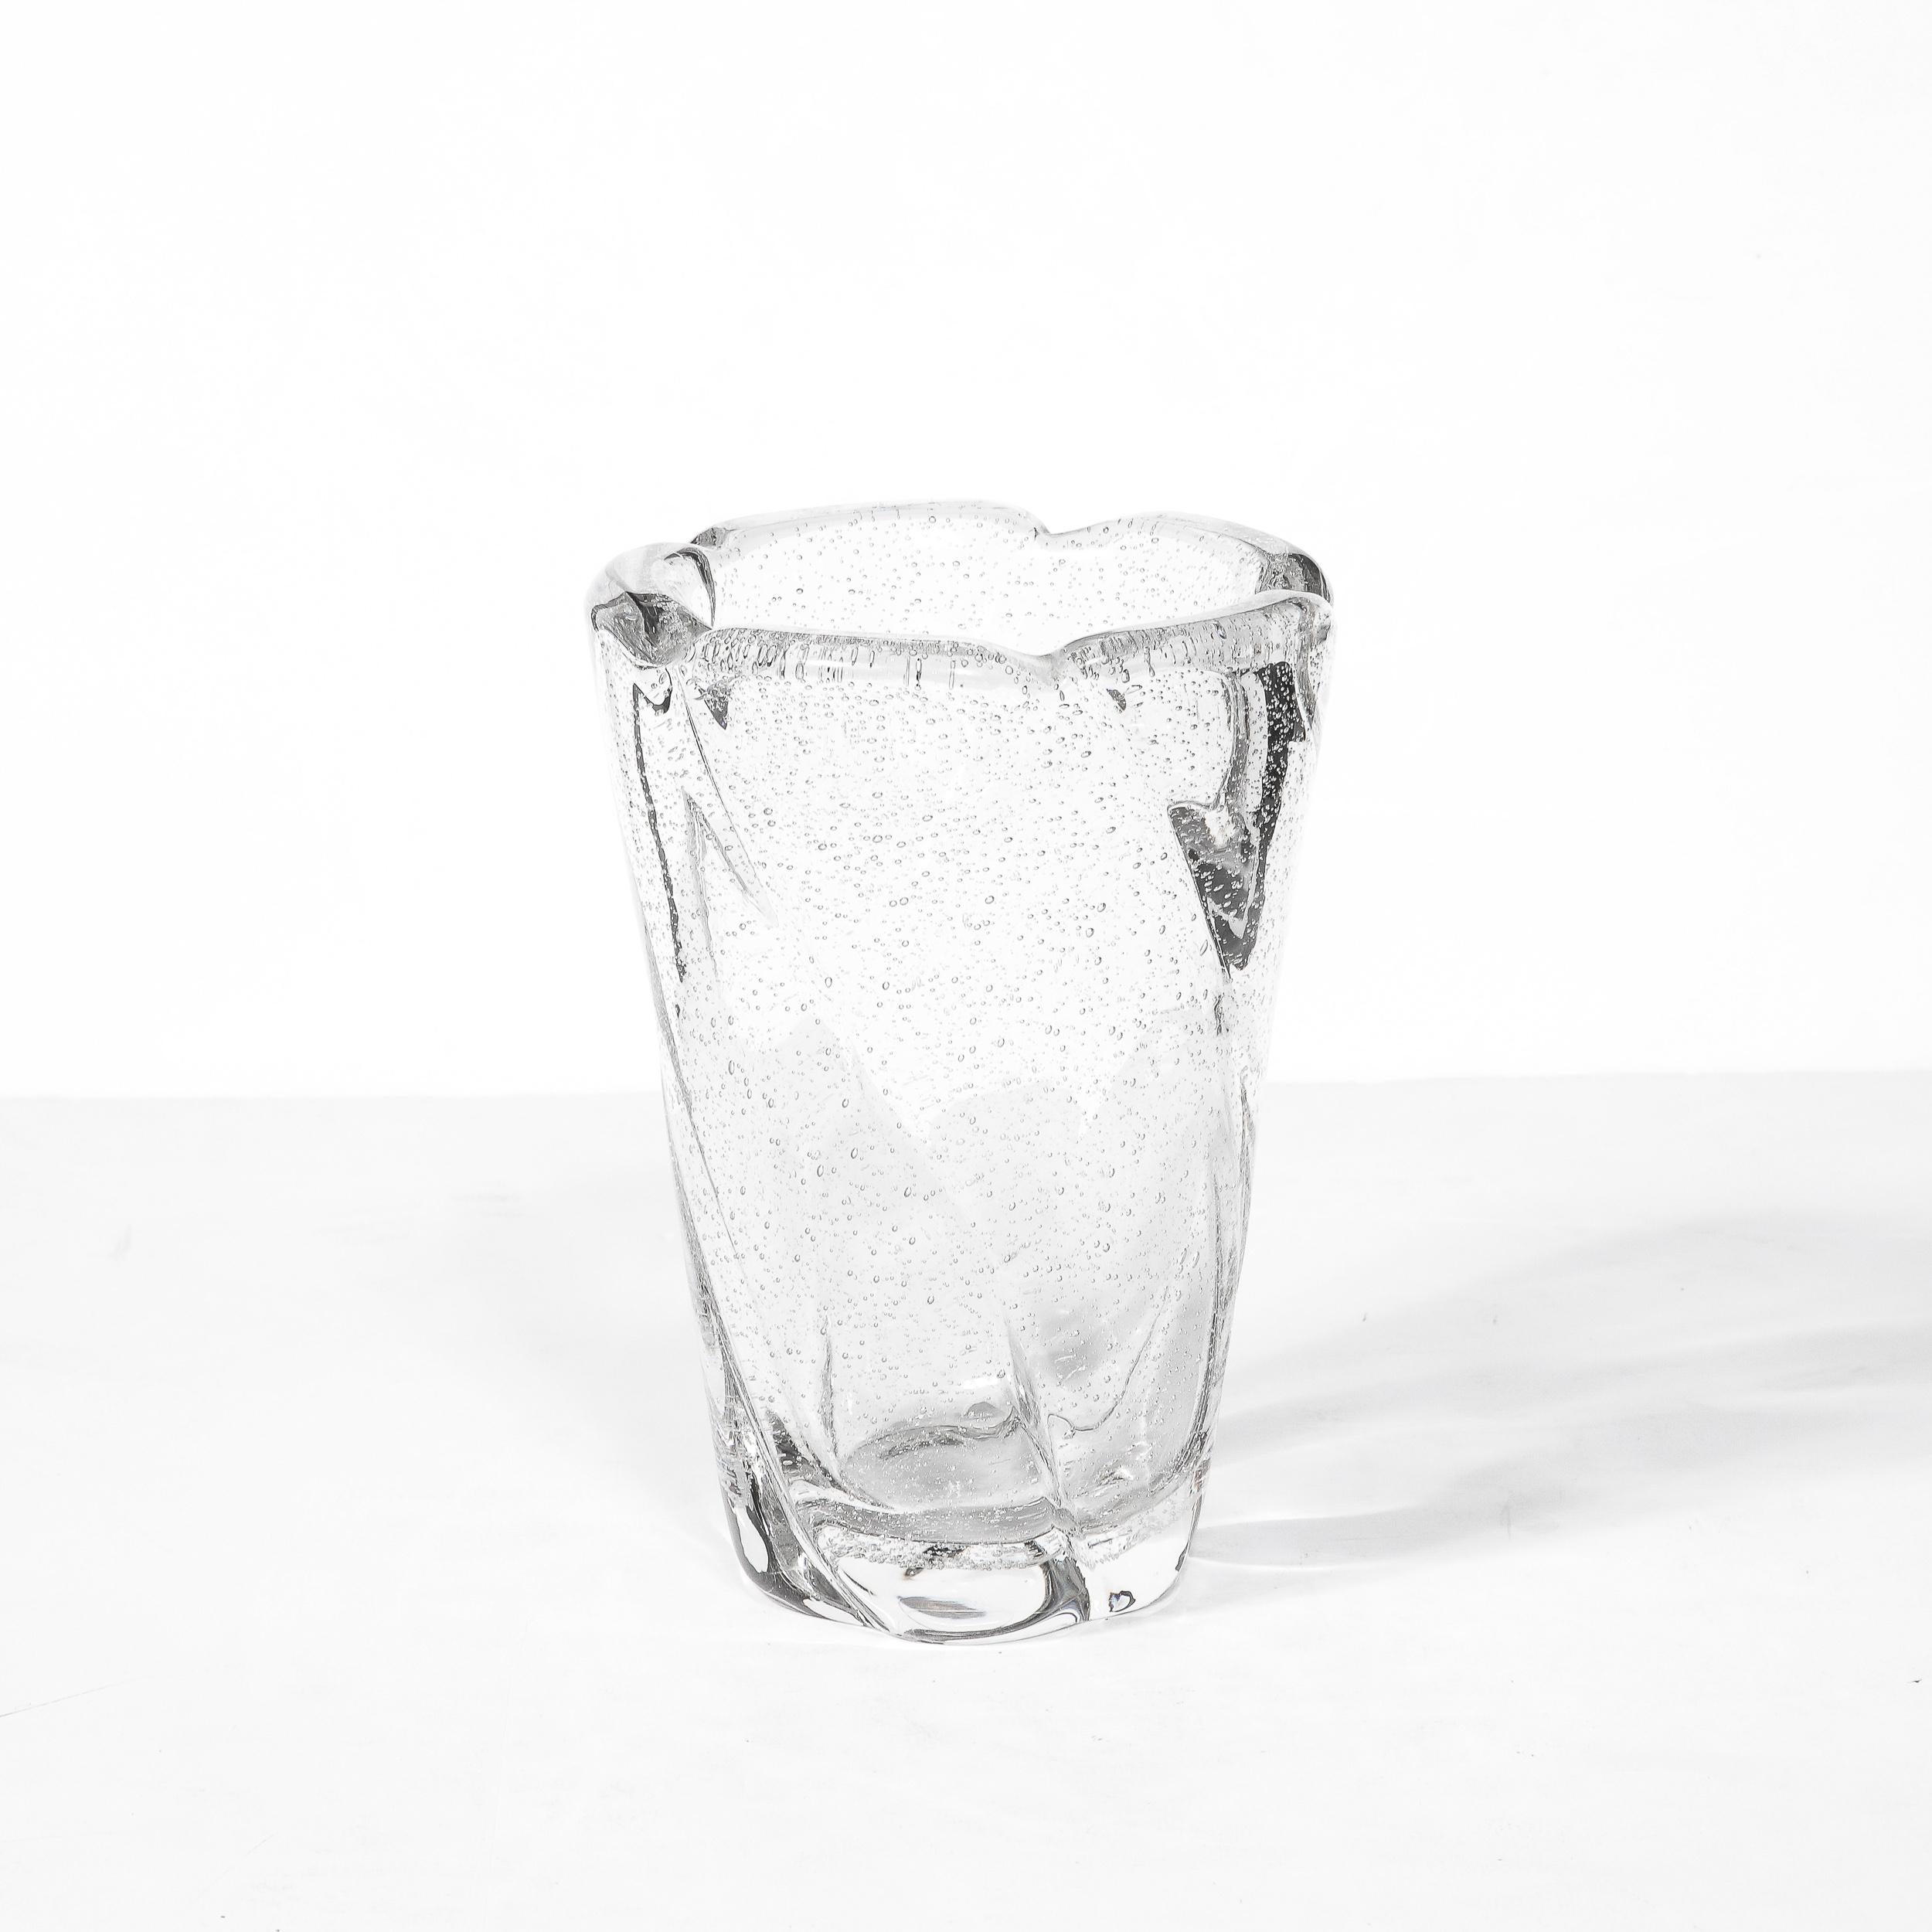 -This Mid-Century Modernist Crystal Vase by Daum originates from Nancy, France, Circa 1960. A lovely piece brimming with quiet energy, the vase features stunning murine detailing within the crystal and a gently curved spiral of groves gracefully